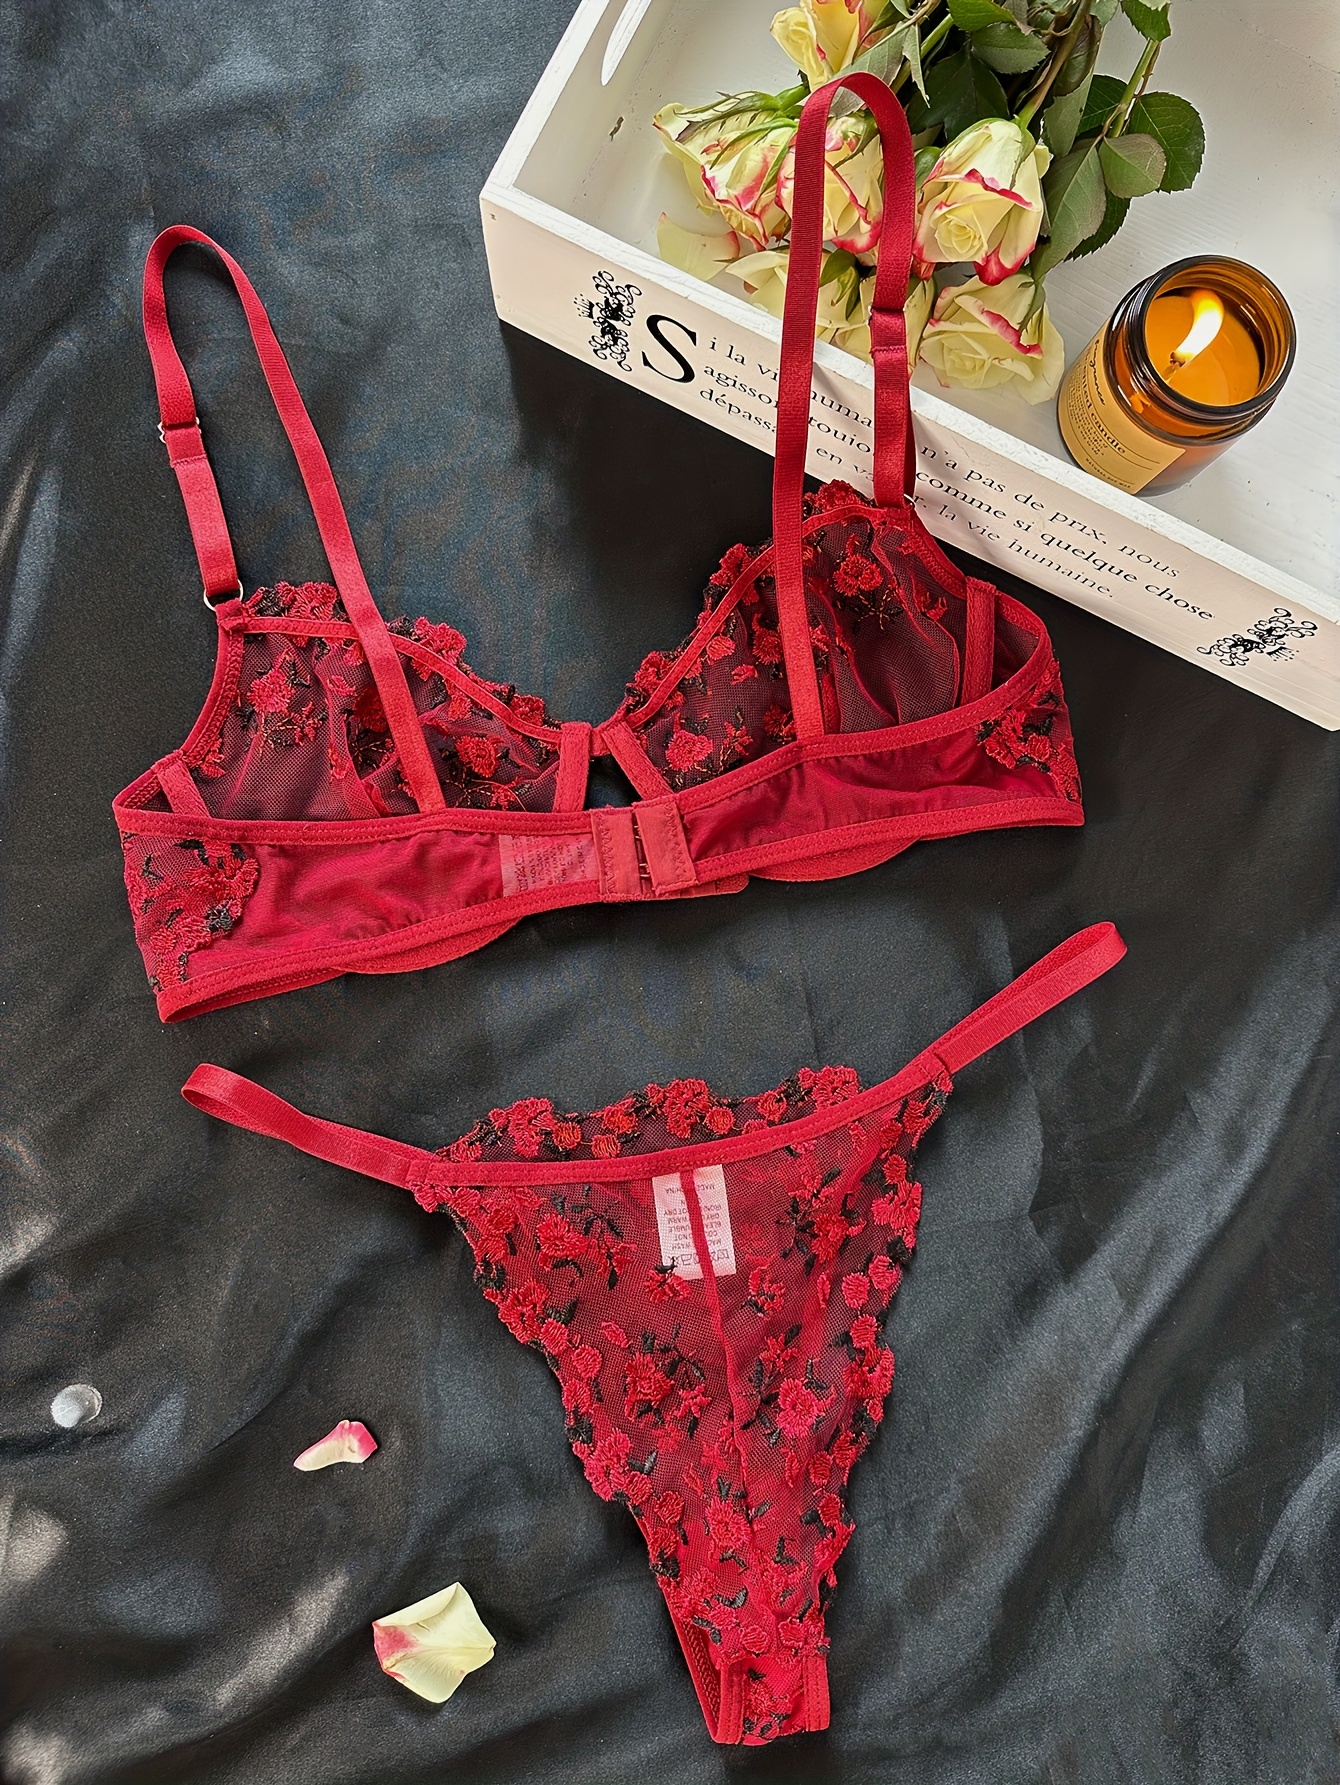 Ybcg Women Lingerie Red Bra Lace Unlined Embroidery Floral